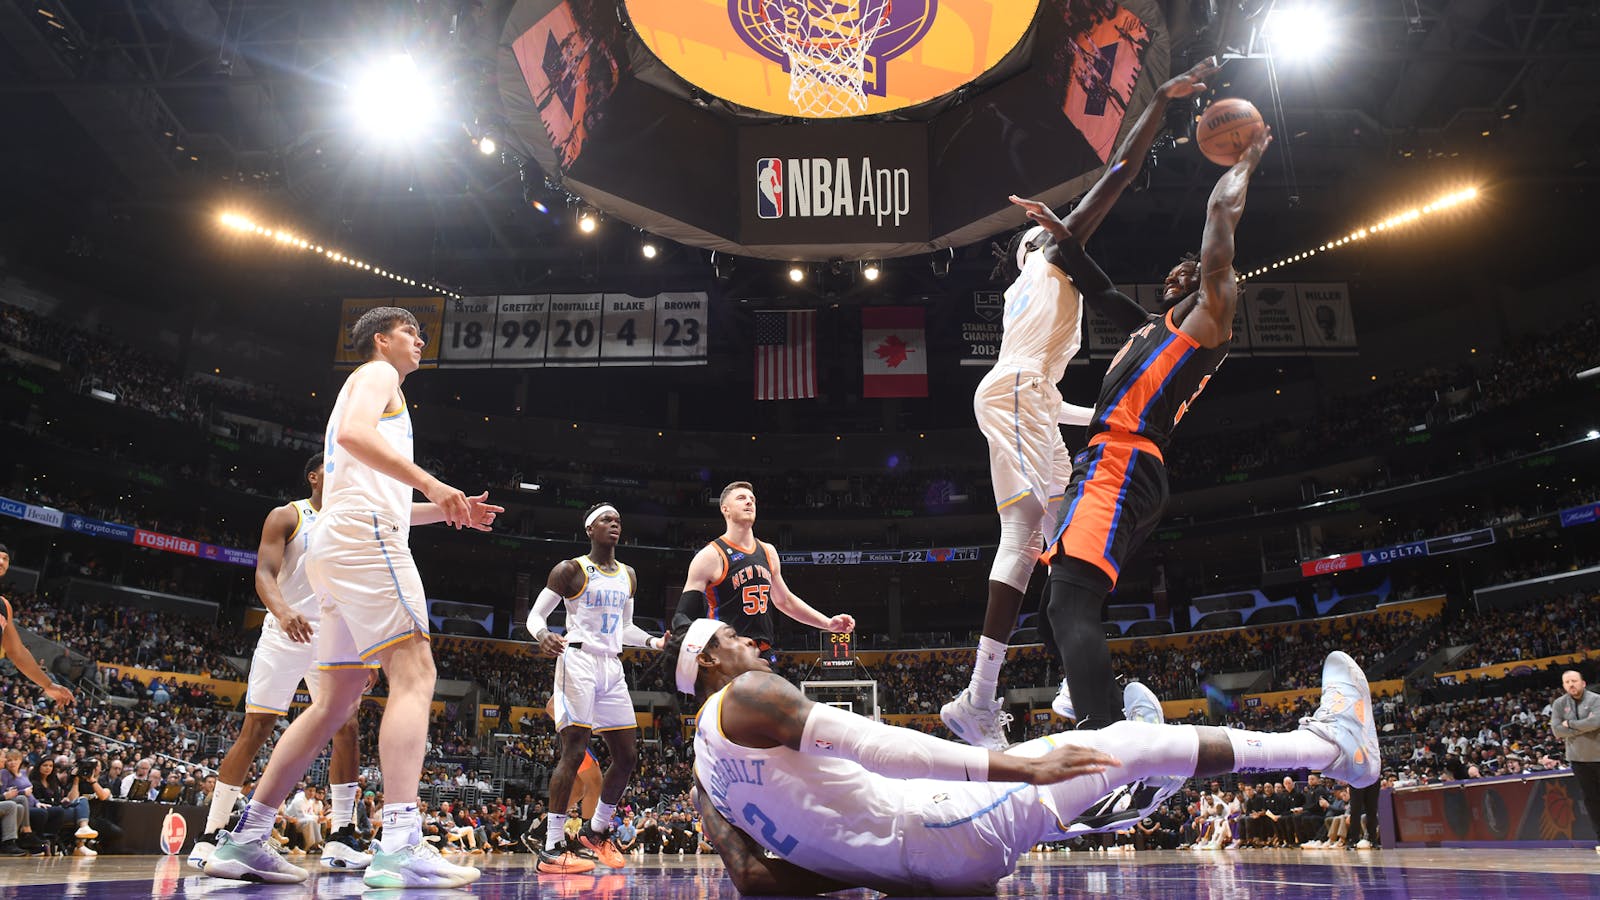 A recent New York Knicks/Los Angeles Lakers game. Photo by Adam Pantozzi/NBAE via Getty Images.